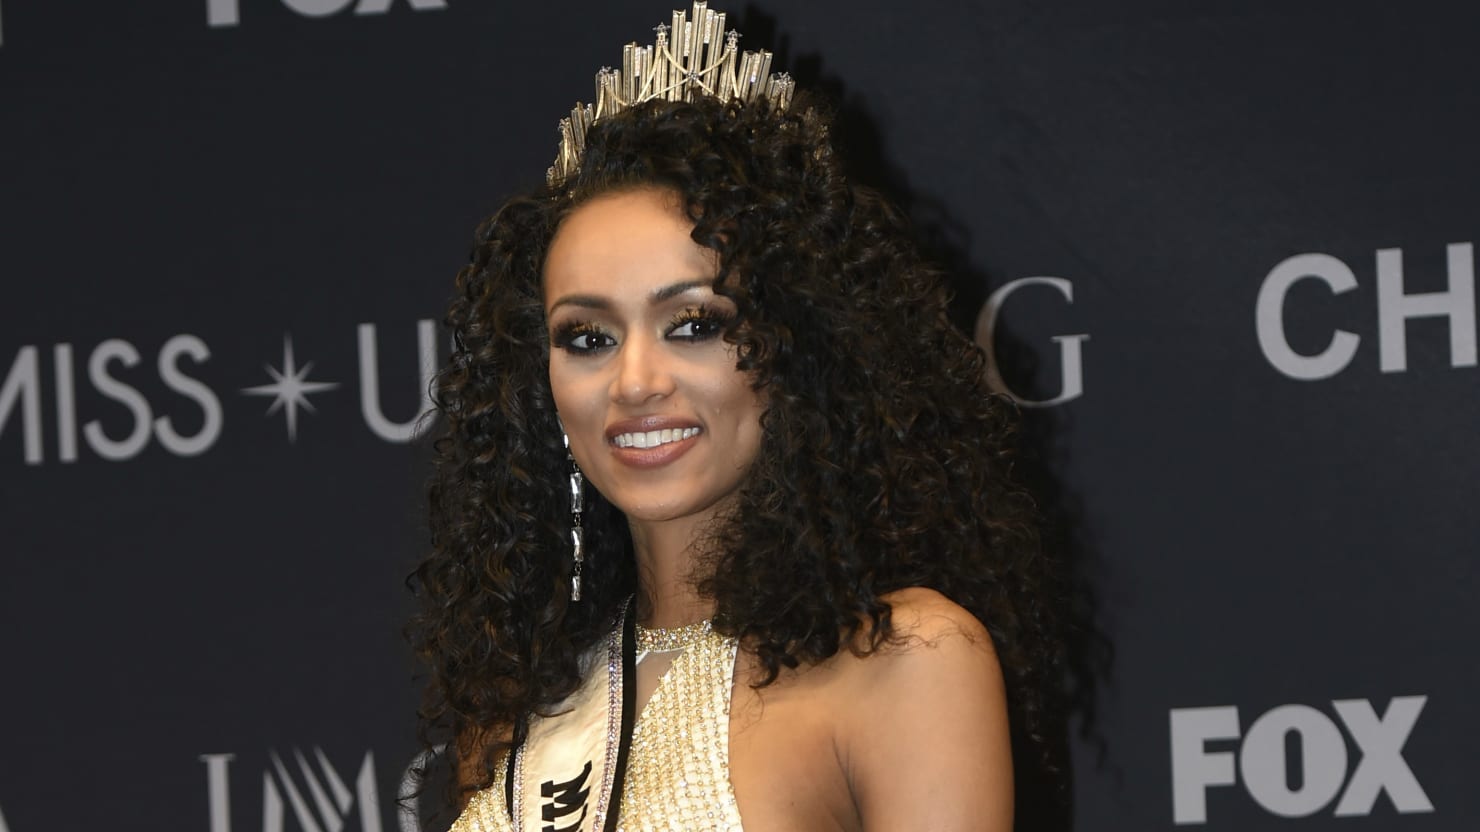 The New Miss USA Just Stirred Up A Lot Of Controversy Over This